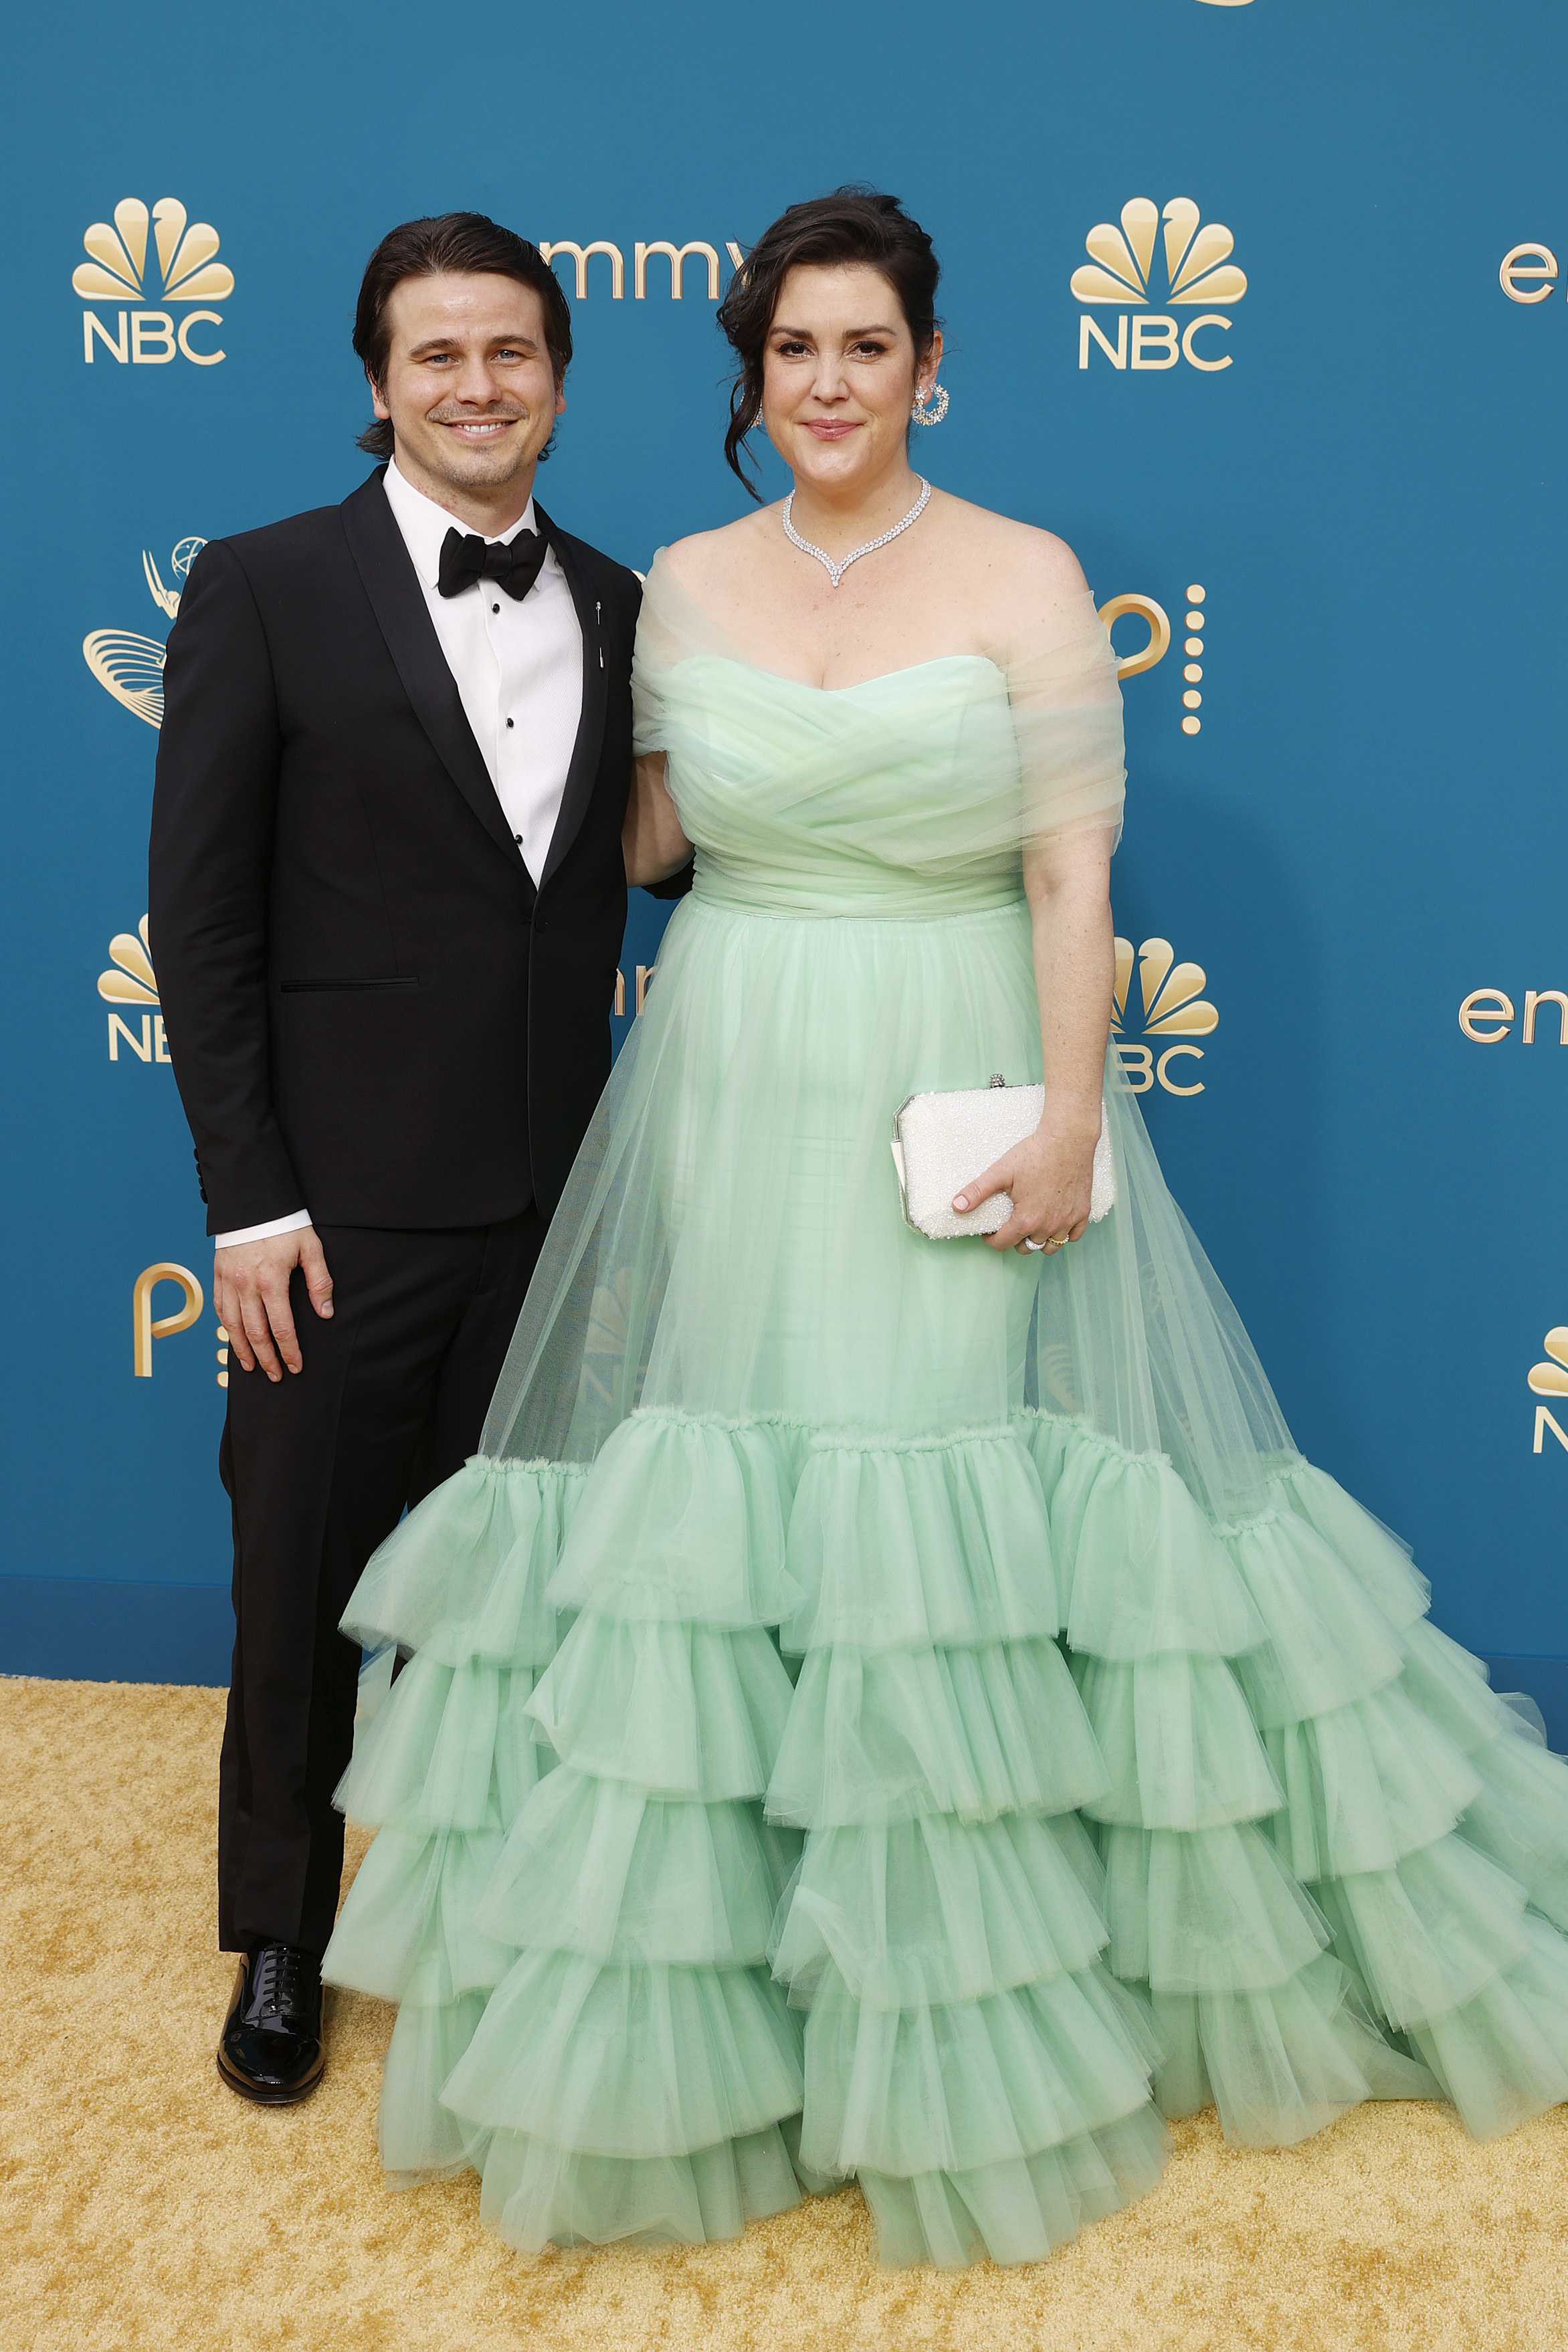 Melanie Lynskey in a pastel green poufy gown and Jason Ritter in a tux